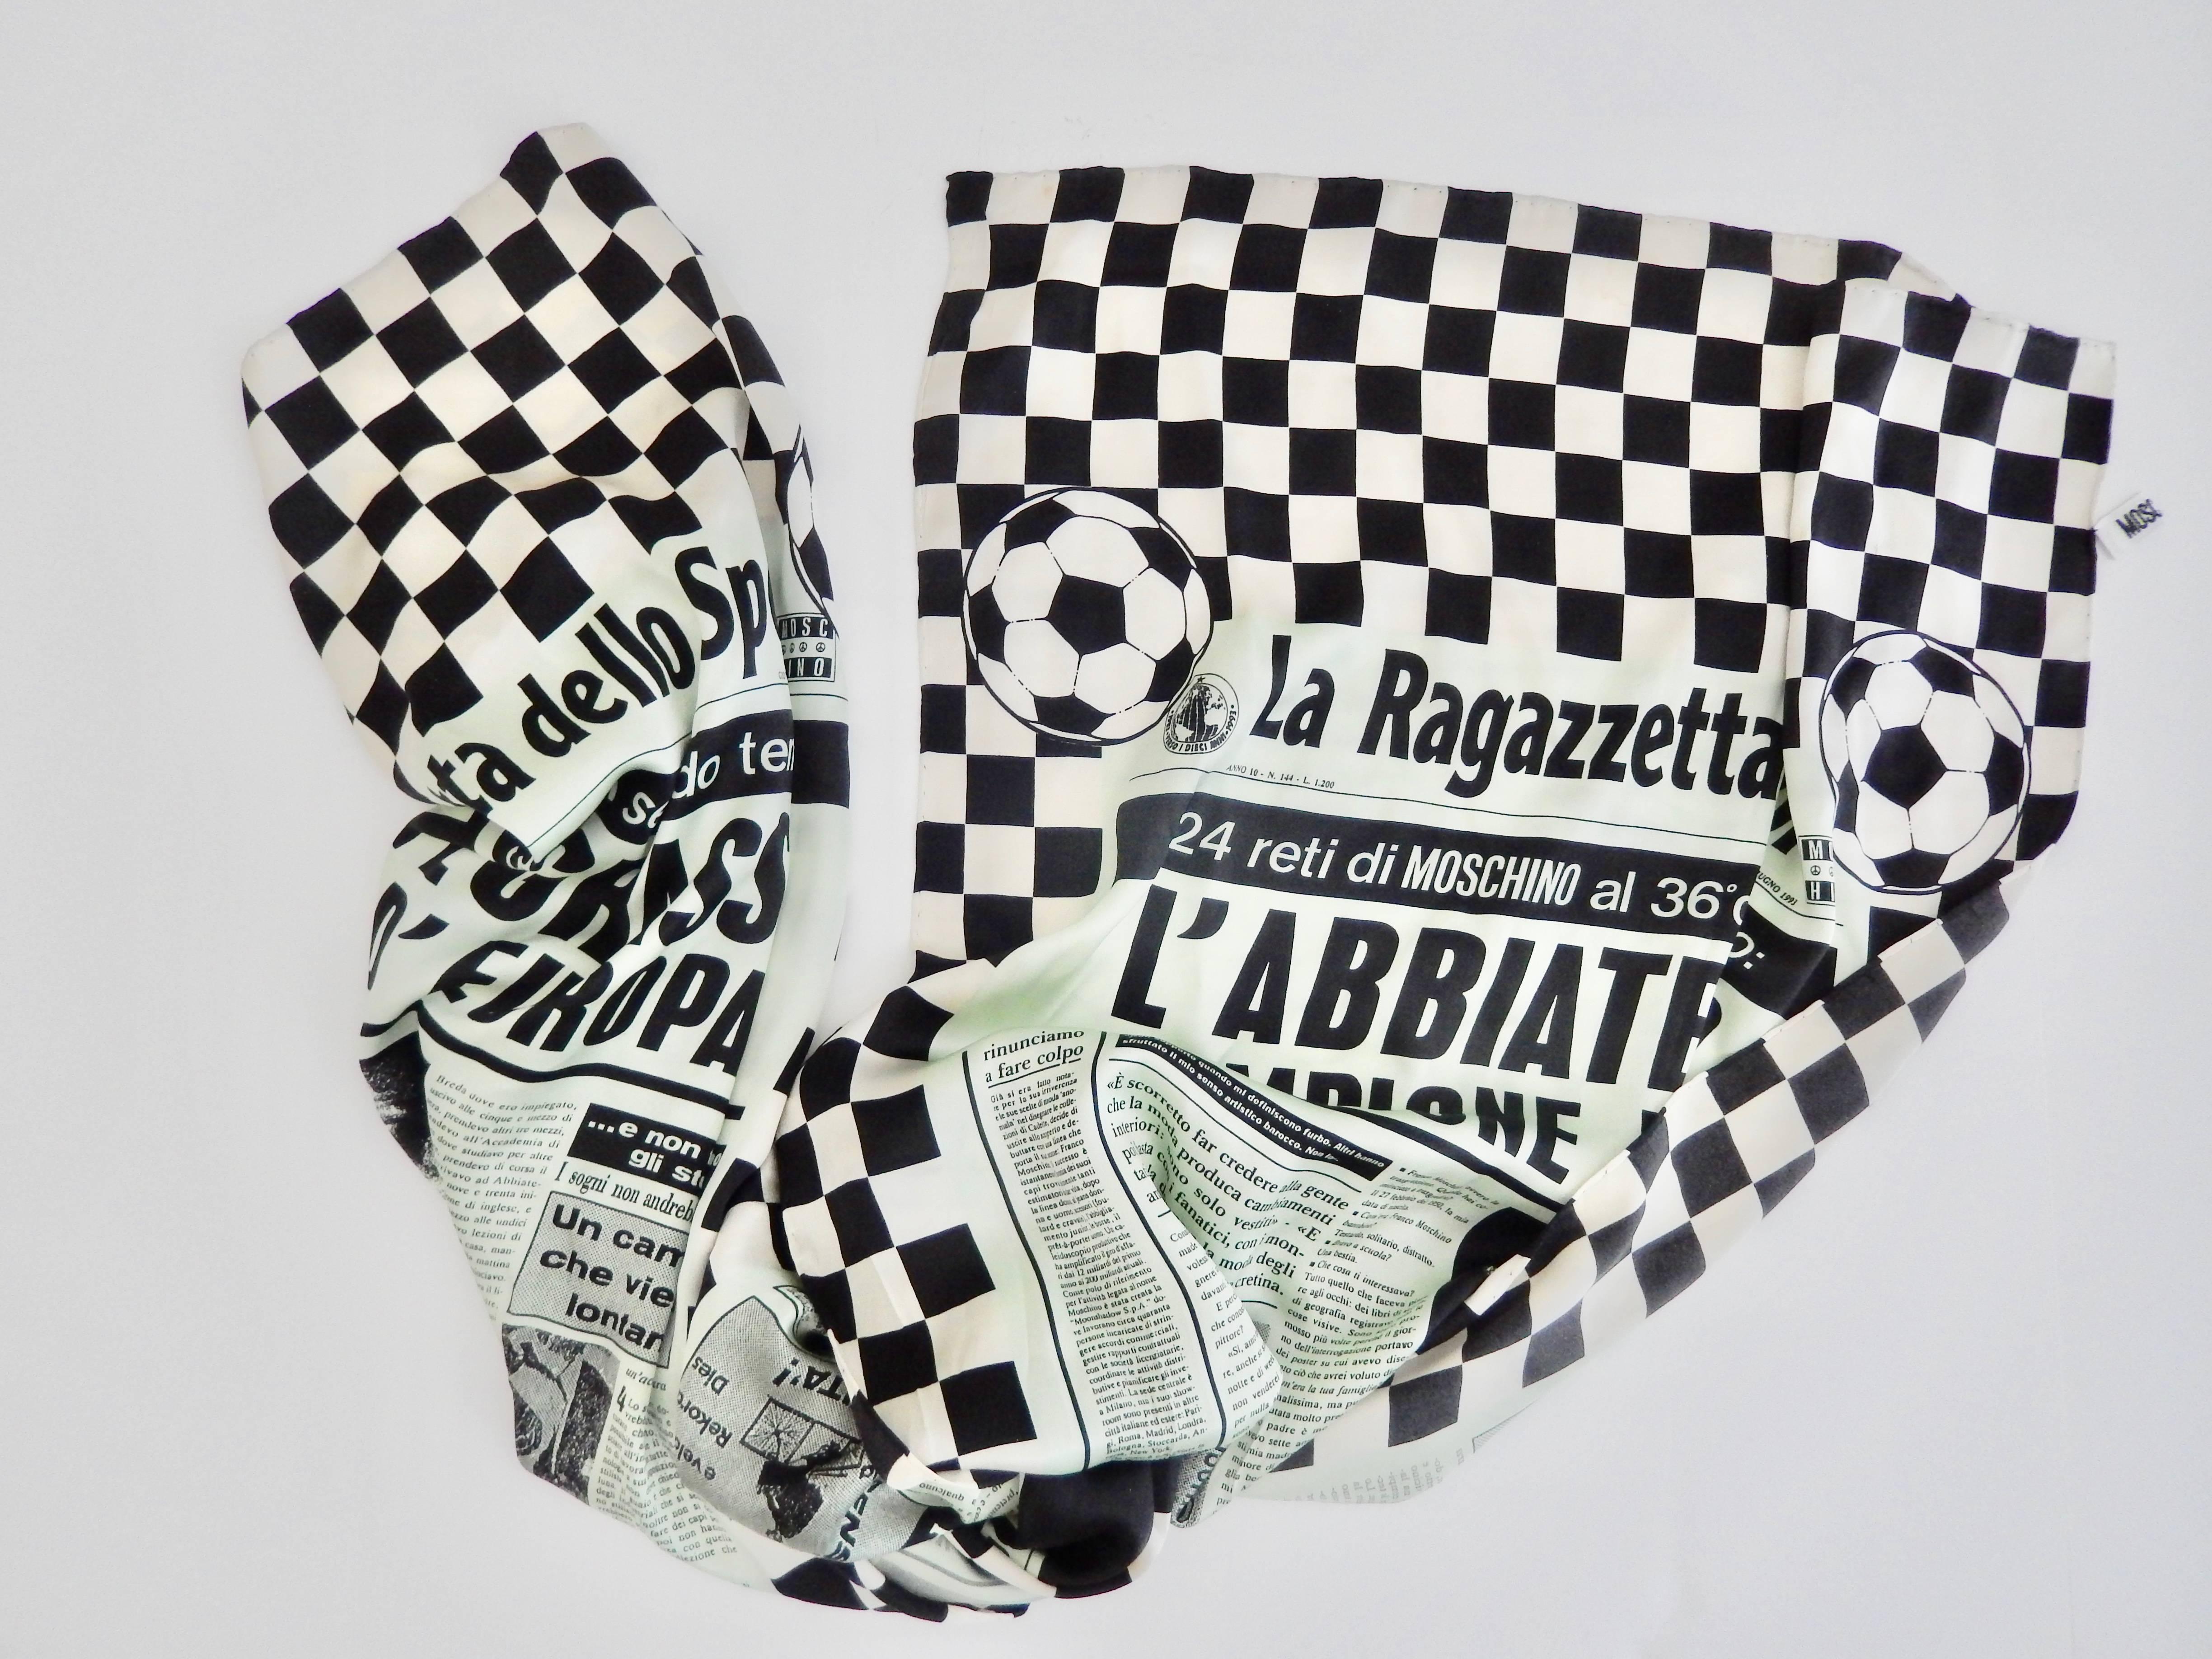 A modernist, vintage silk scarf from the 1990s by the innovative designer Franco Moschino (1950-94).  The irreverent, whimsical design satirizes a sports newspaper and exemplifies Moschino's reputation as an unconventional, avant-garde designer.  A